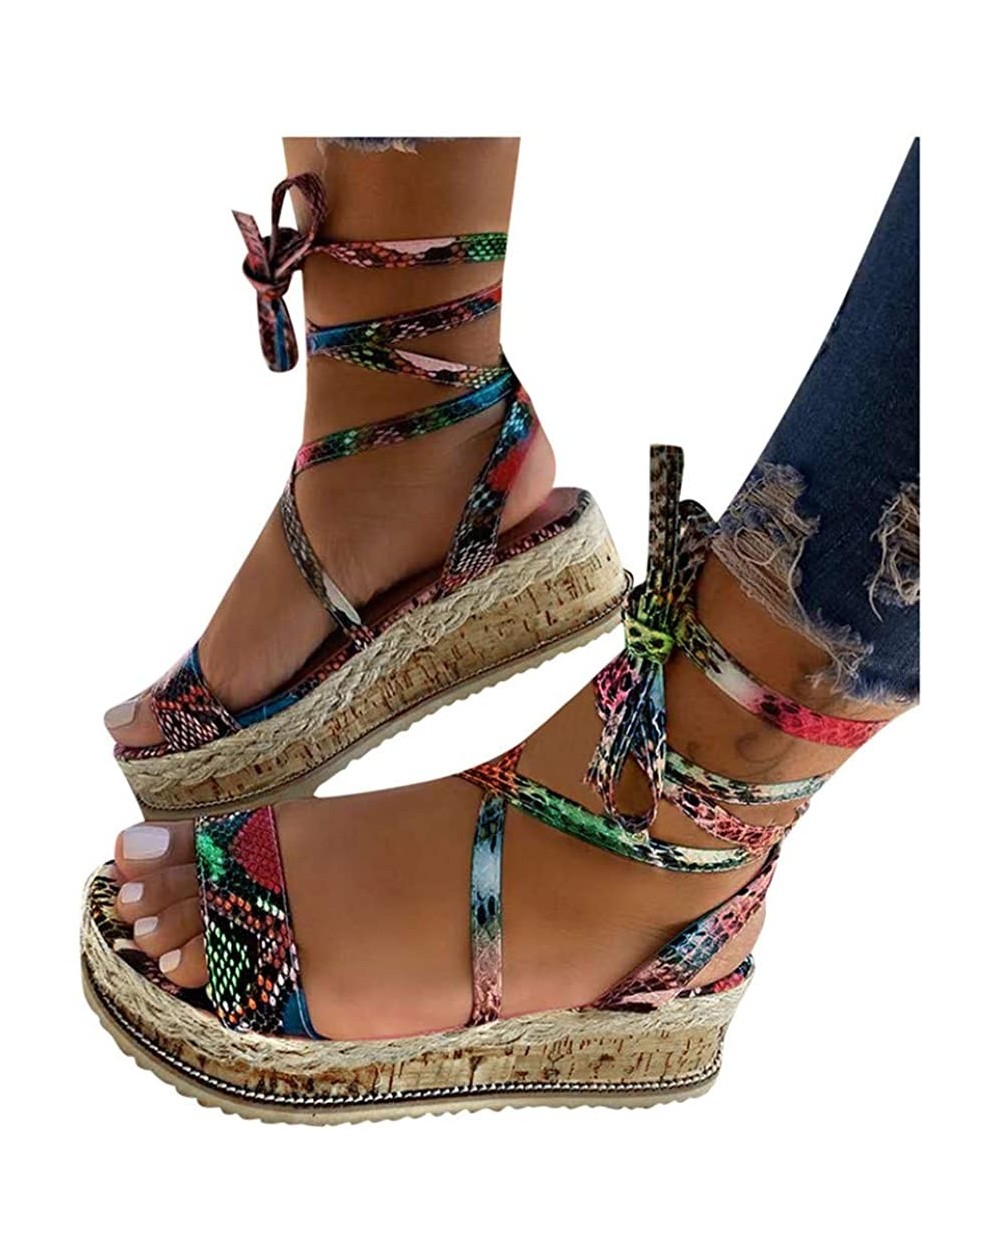 Cake & Cupcake Toppers Womens Espadrilles Sandals Wedge-Women's Platform Sandals Espadrille Wedge Ankle Strap Studded Open-To...